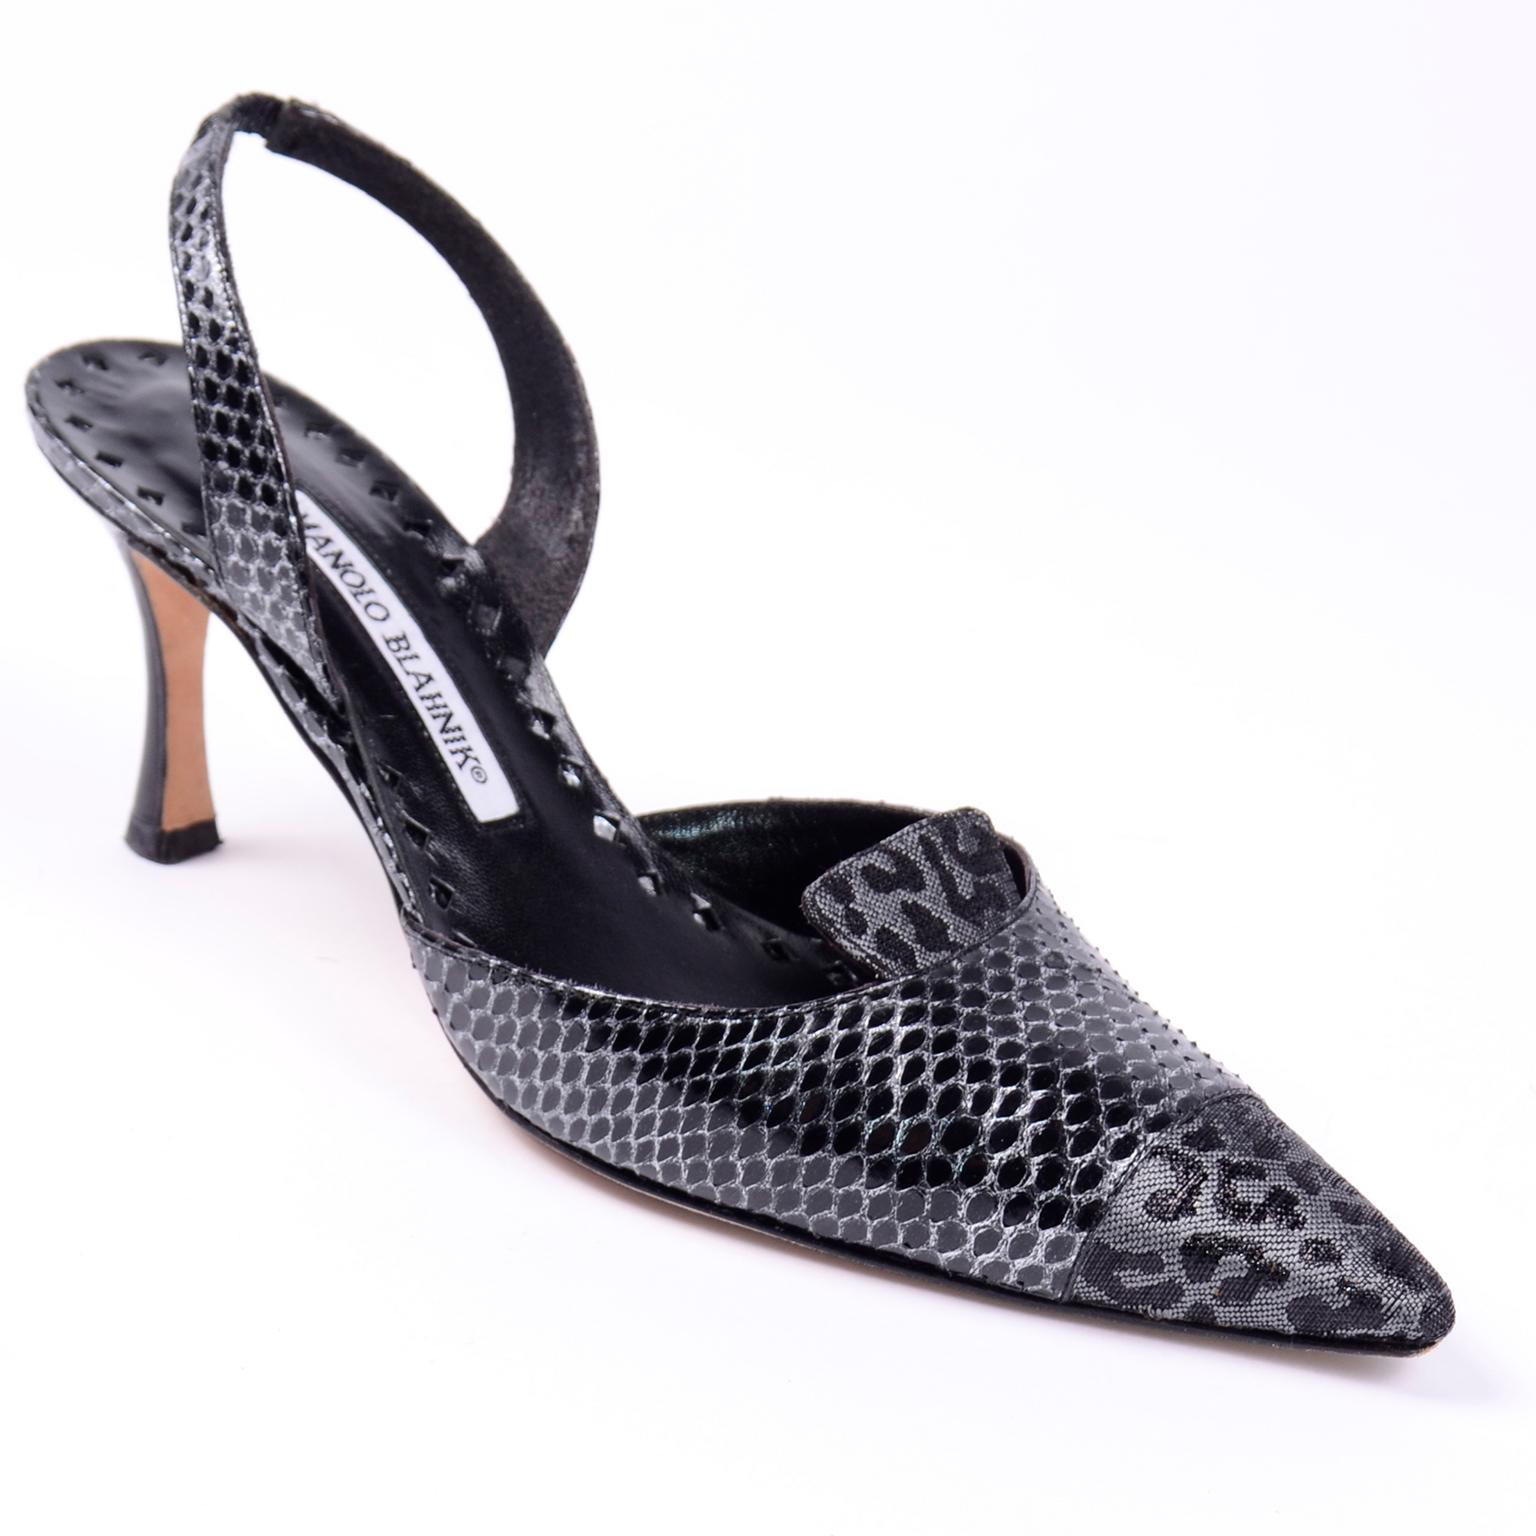 Manolo Blahnik Ploiesti Snakeskin Shoes With Leopard Print Toes In Excellent Condition For Sale In Portland, OR